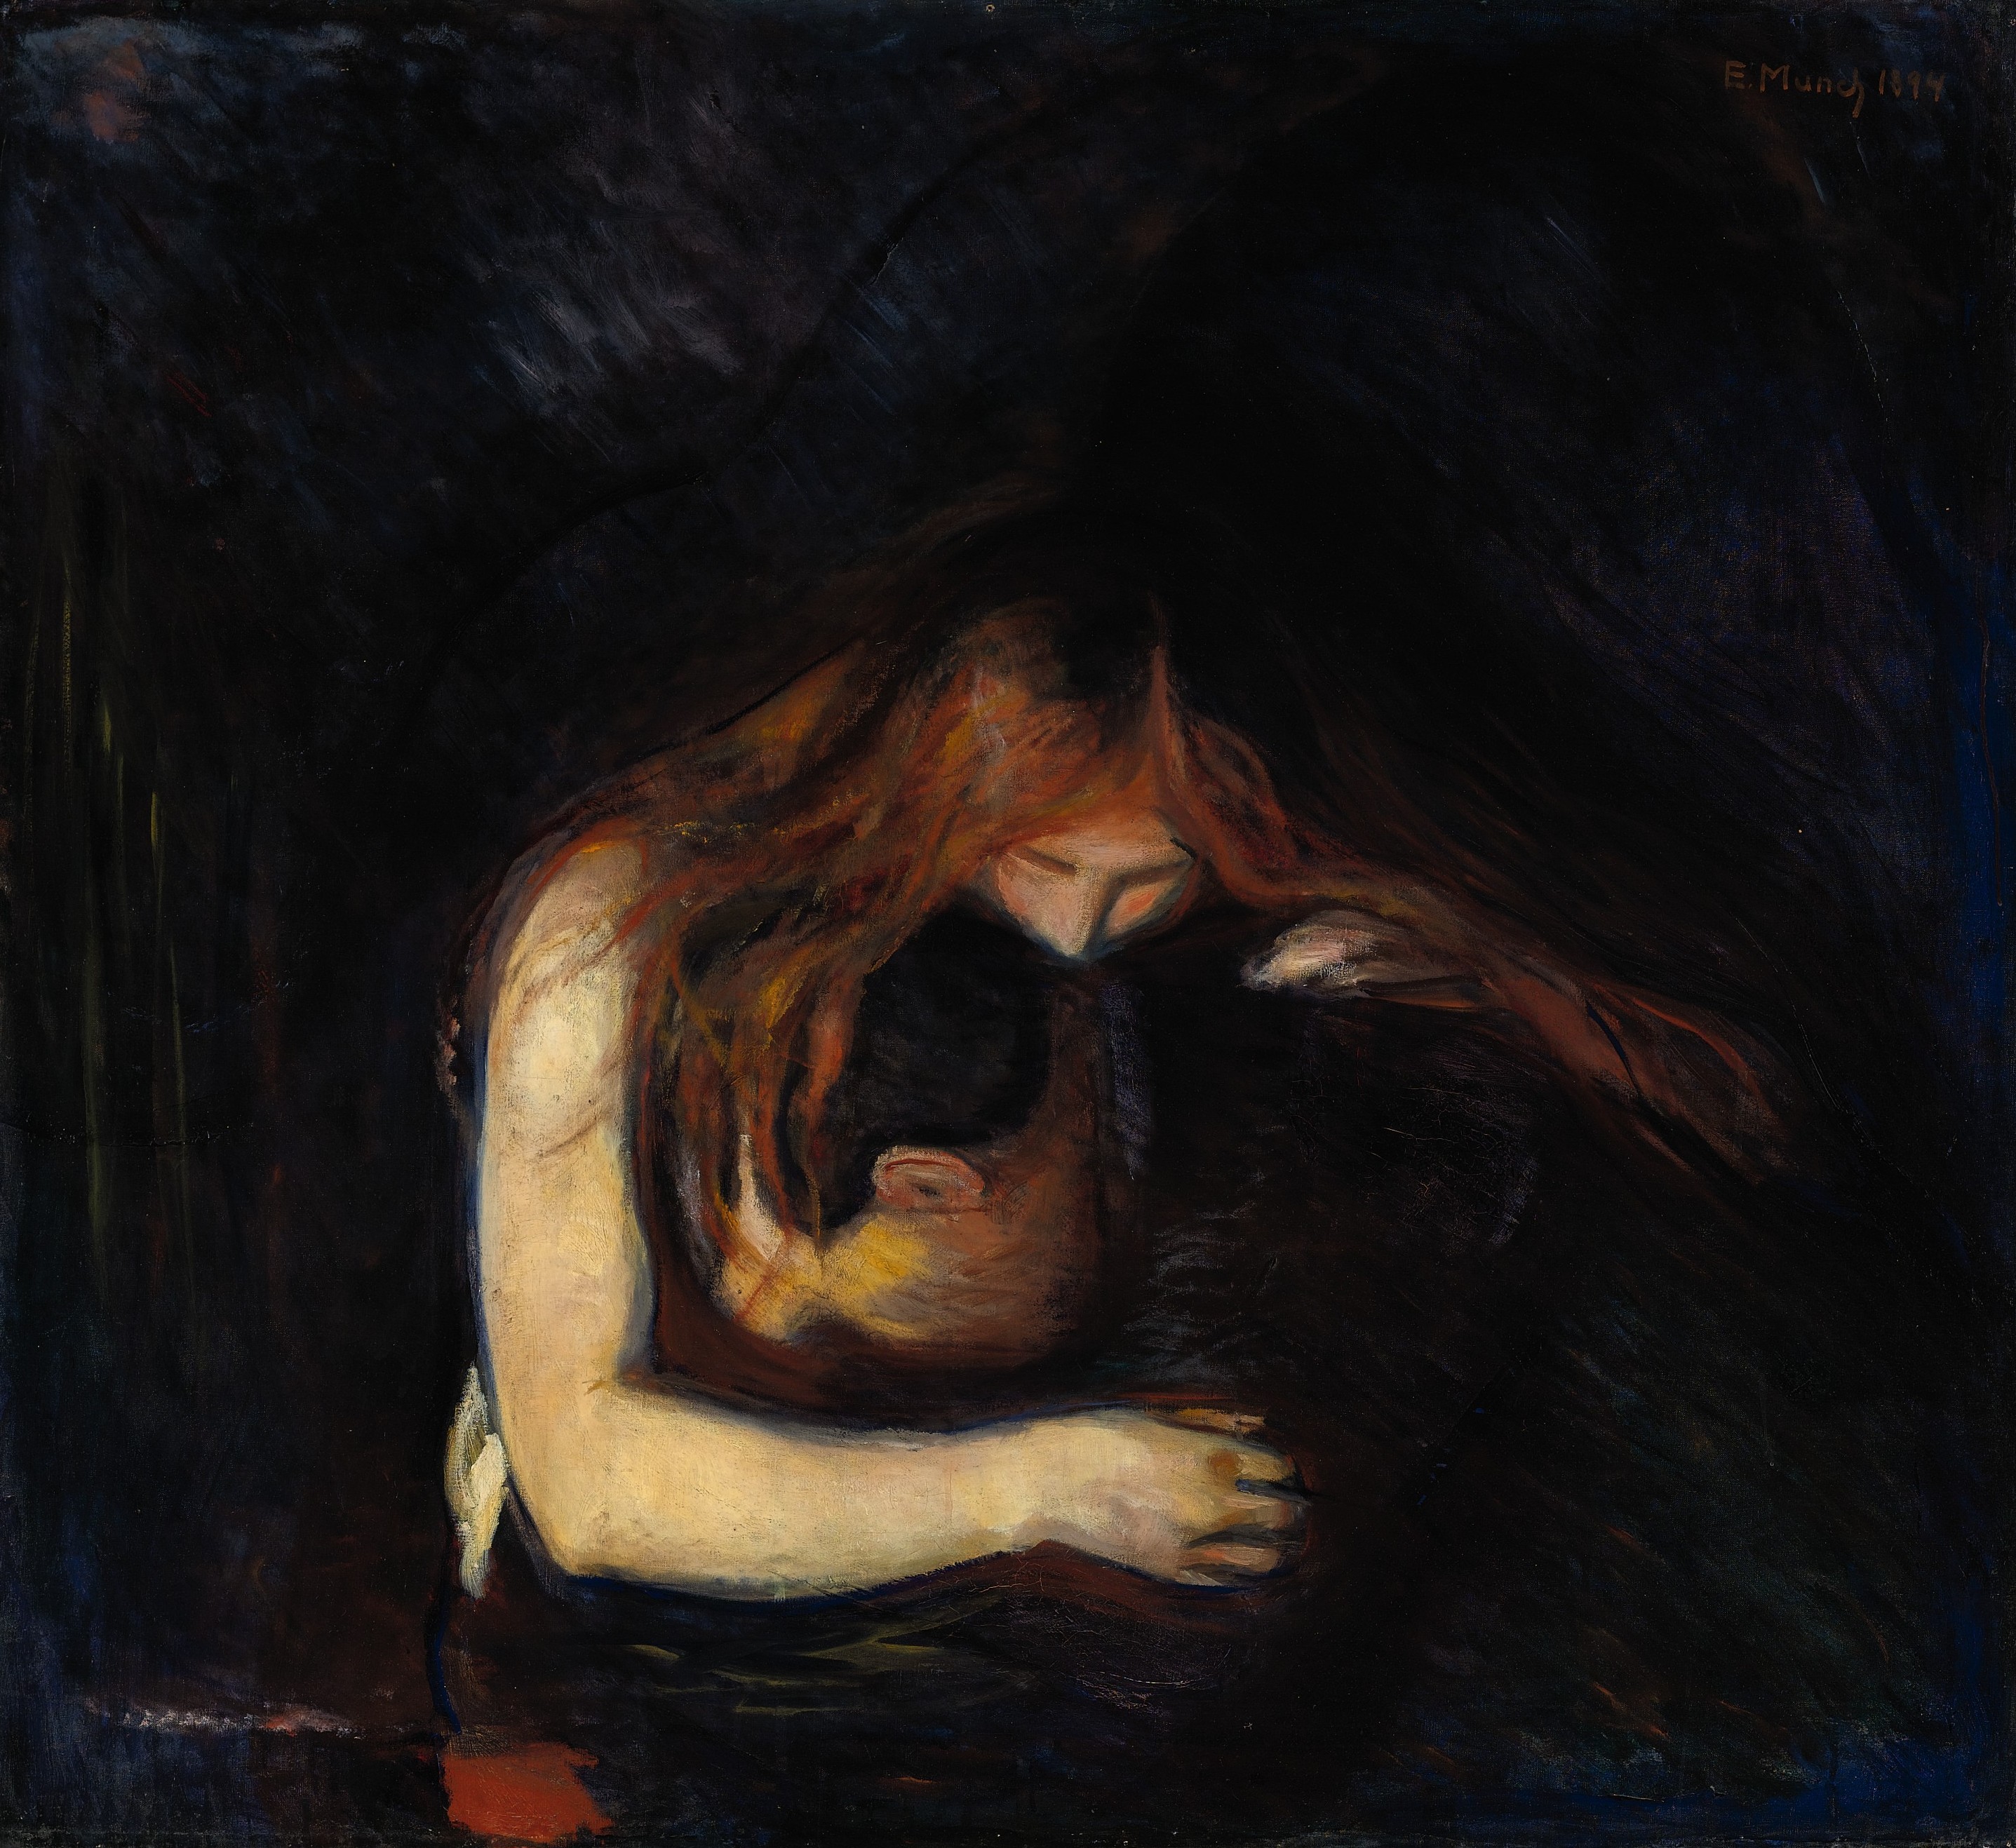 Vampire by Edvard Munch - 1893 - 91 x 109 cm private collection